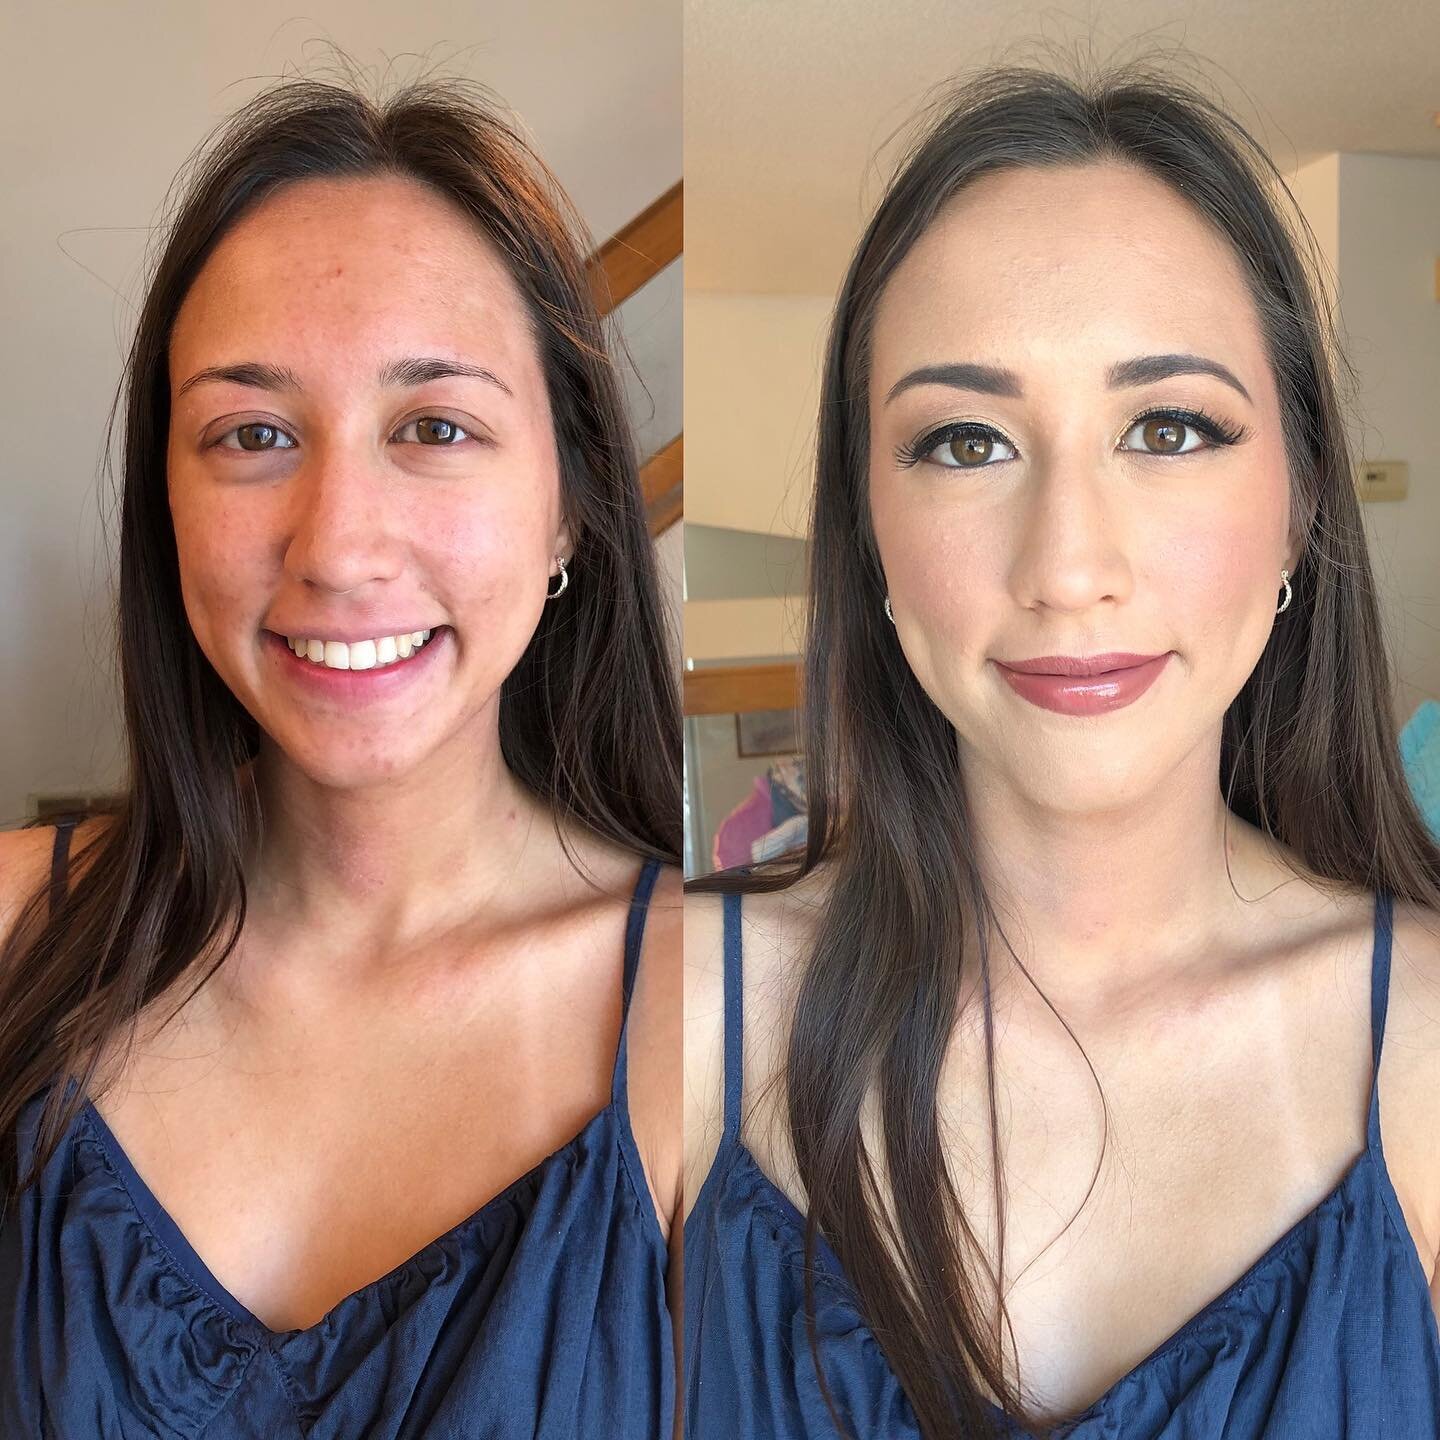 Absolutely gorgeous before &amp; after for her bridal trial 💕

For Inquiries-
HTTPS://www.makeupbycaitlin.com

https://www.facebook.com/makeupbycaitlinspah/

Instagram : @caitlinguillien_mua 

PRODUCTS USED
PUR 4 in 1 concealer, powder, visionary pa